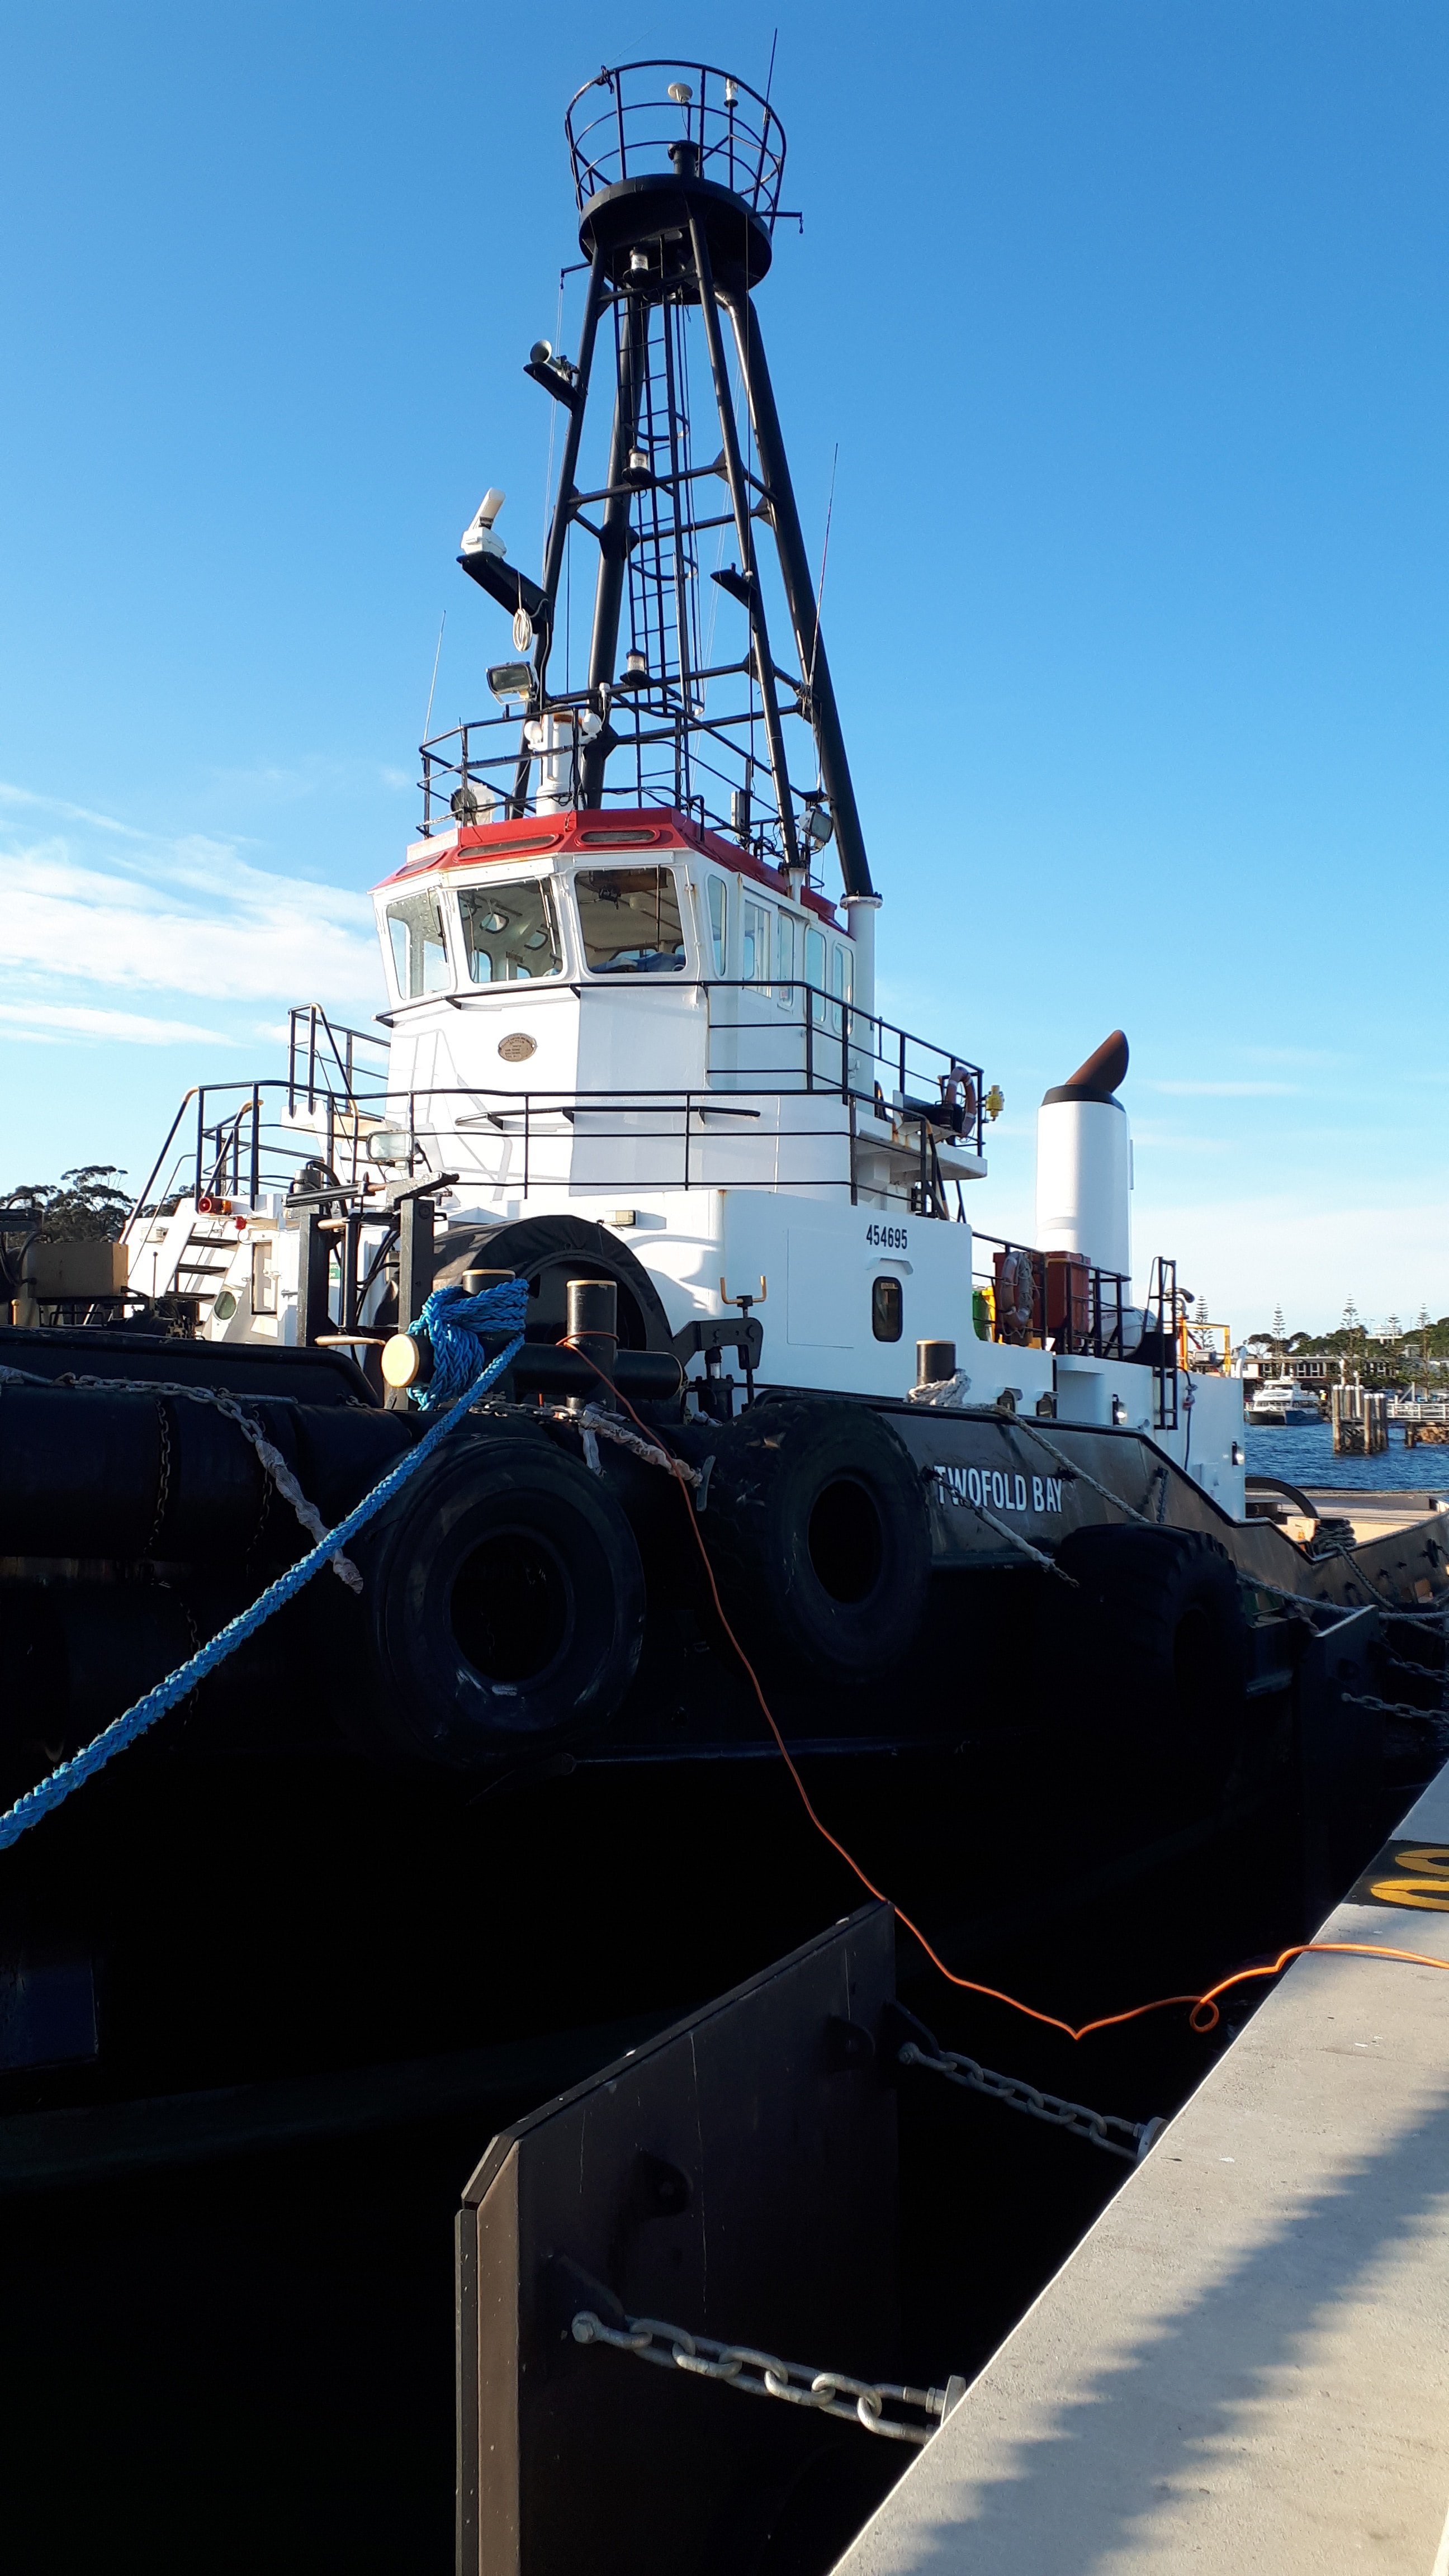 Tug boat on a dock